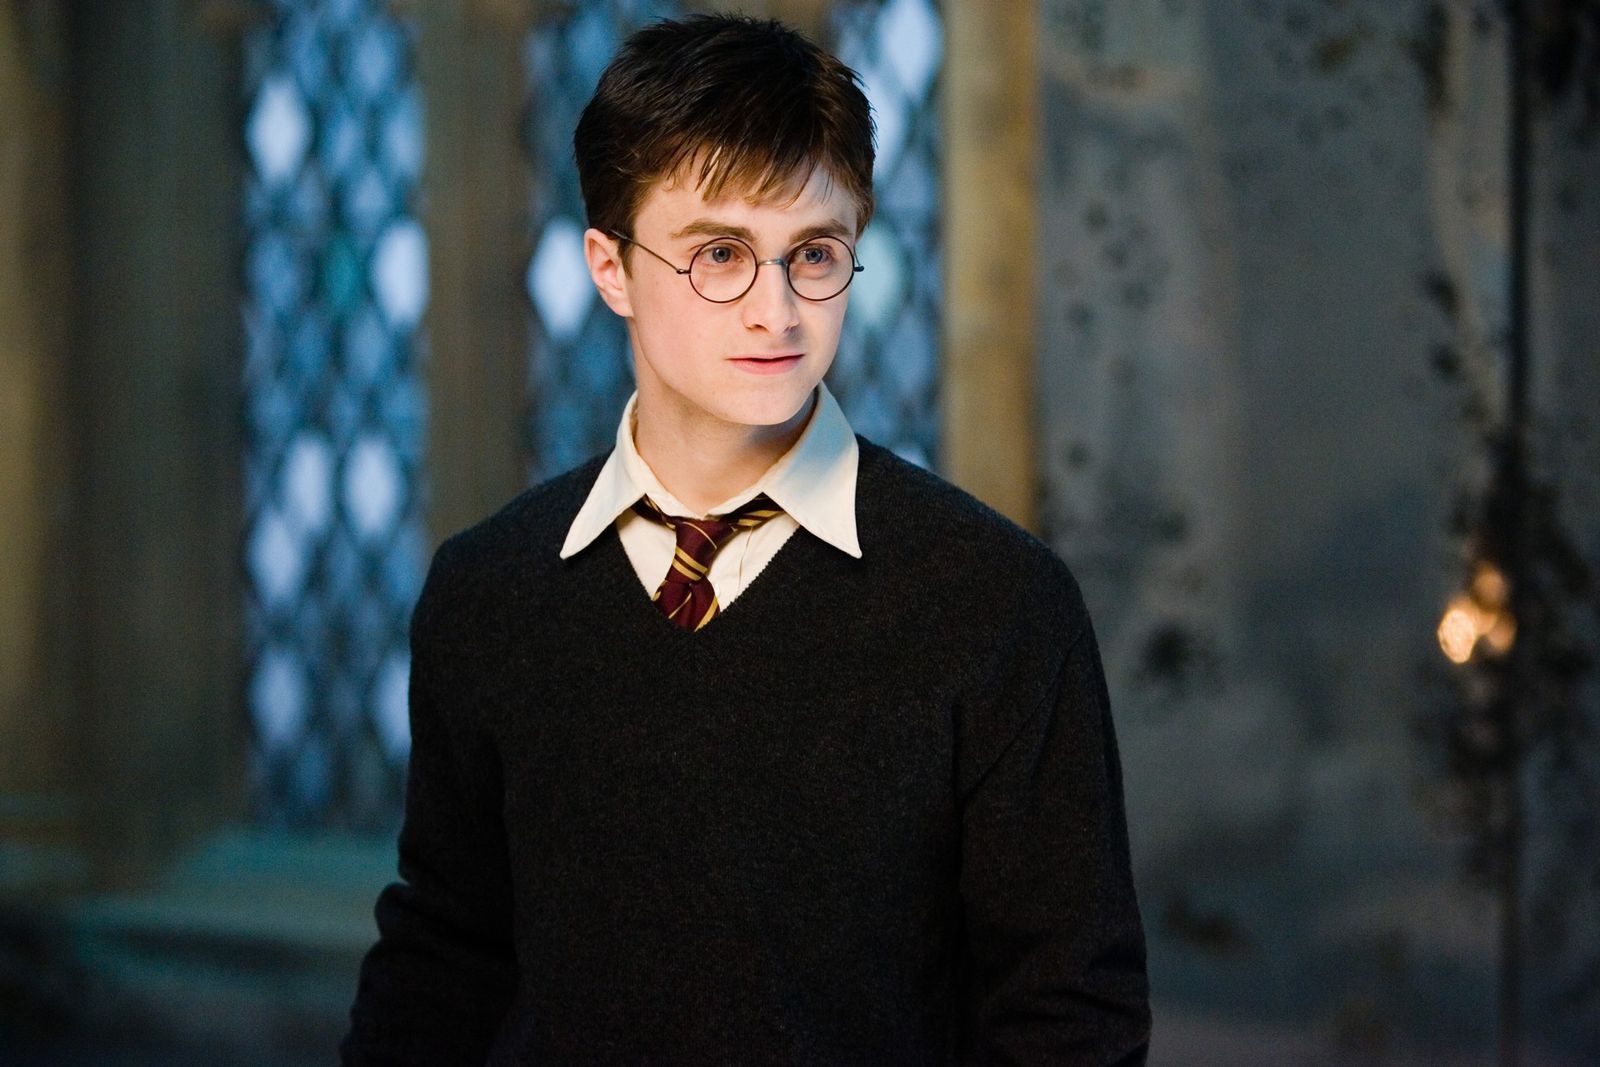 No Harry Potter for Radcliffe again despite Rowling’s fresh story